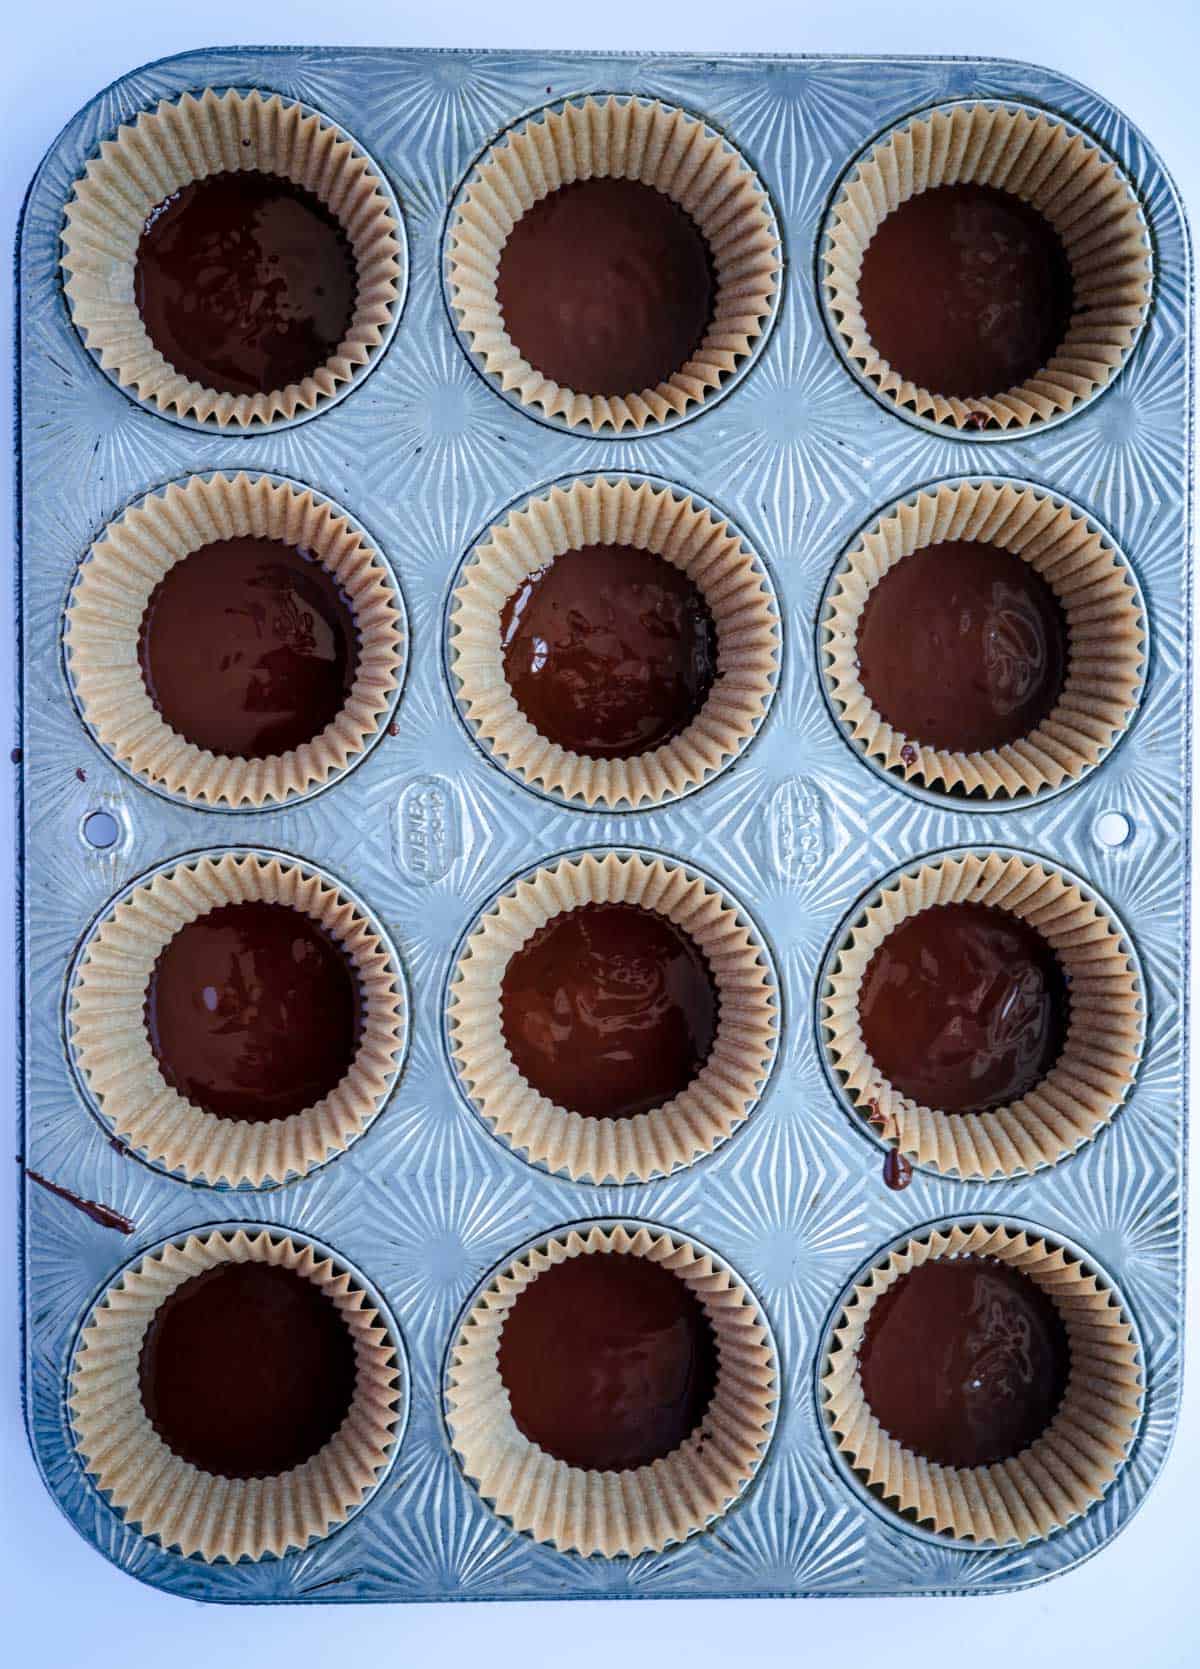 lined 12-cup muffin tin with melted dark chocolate in each cup